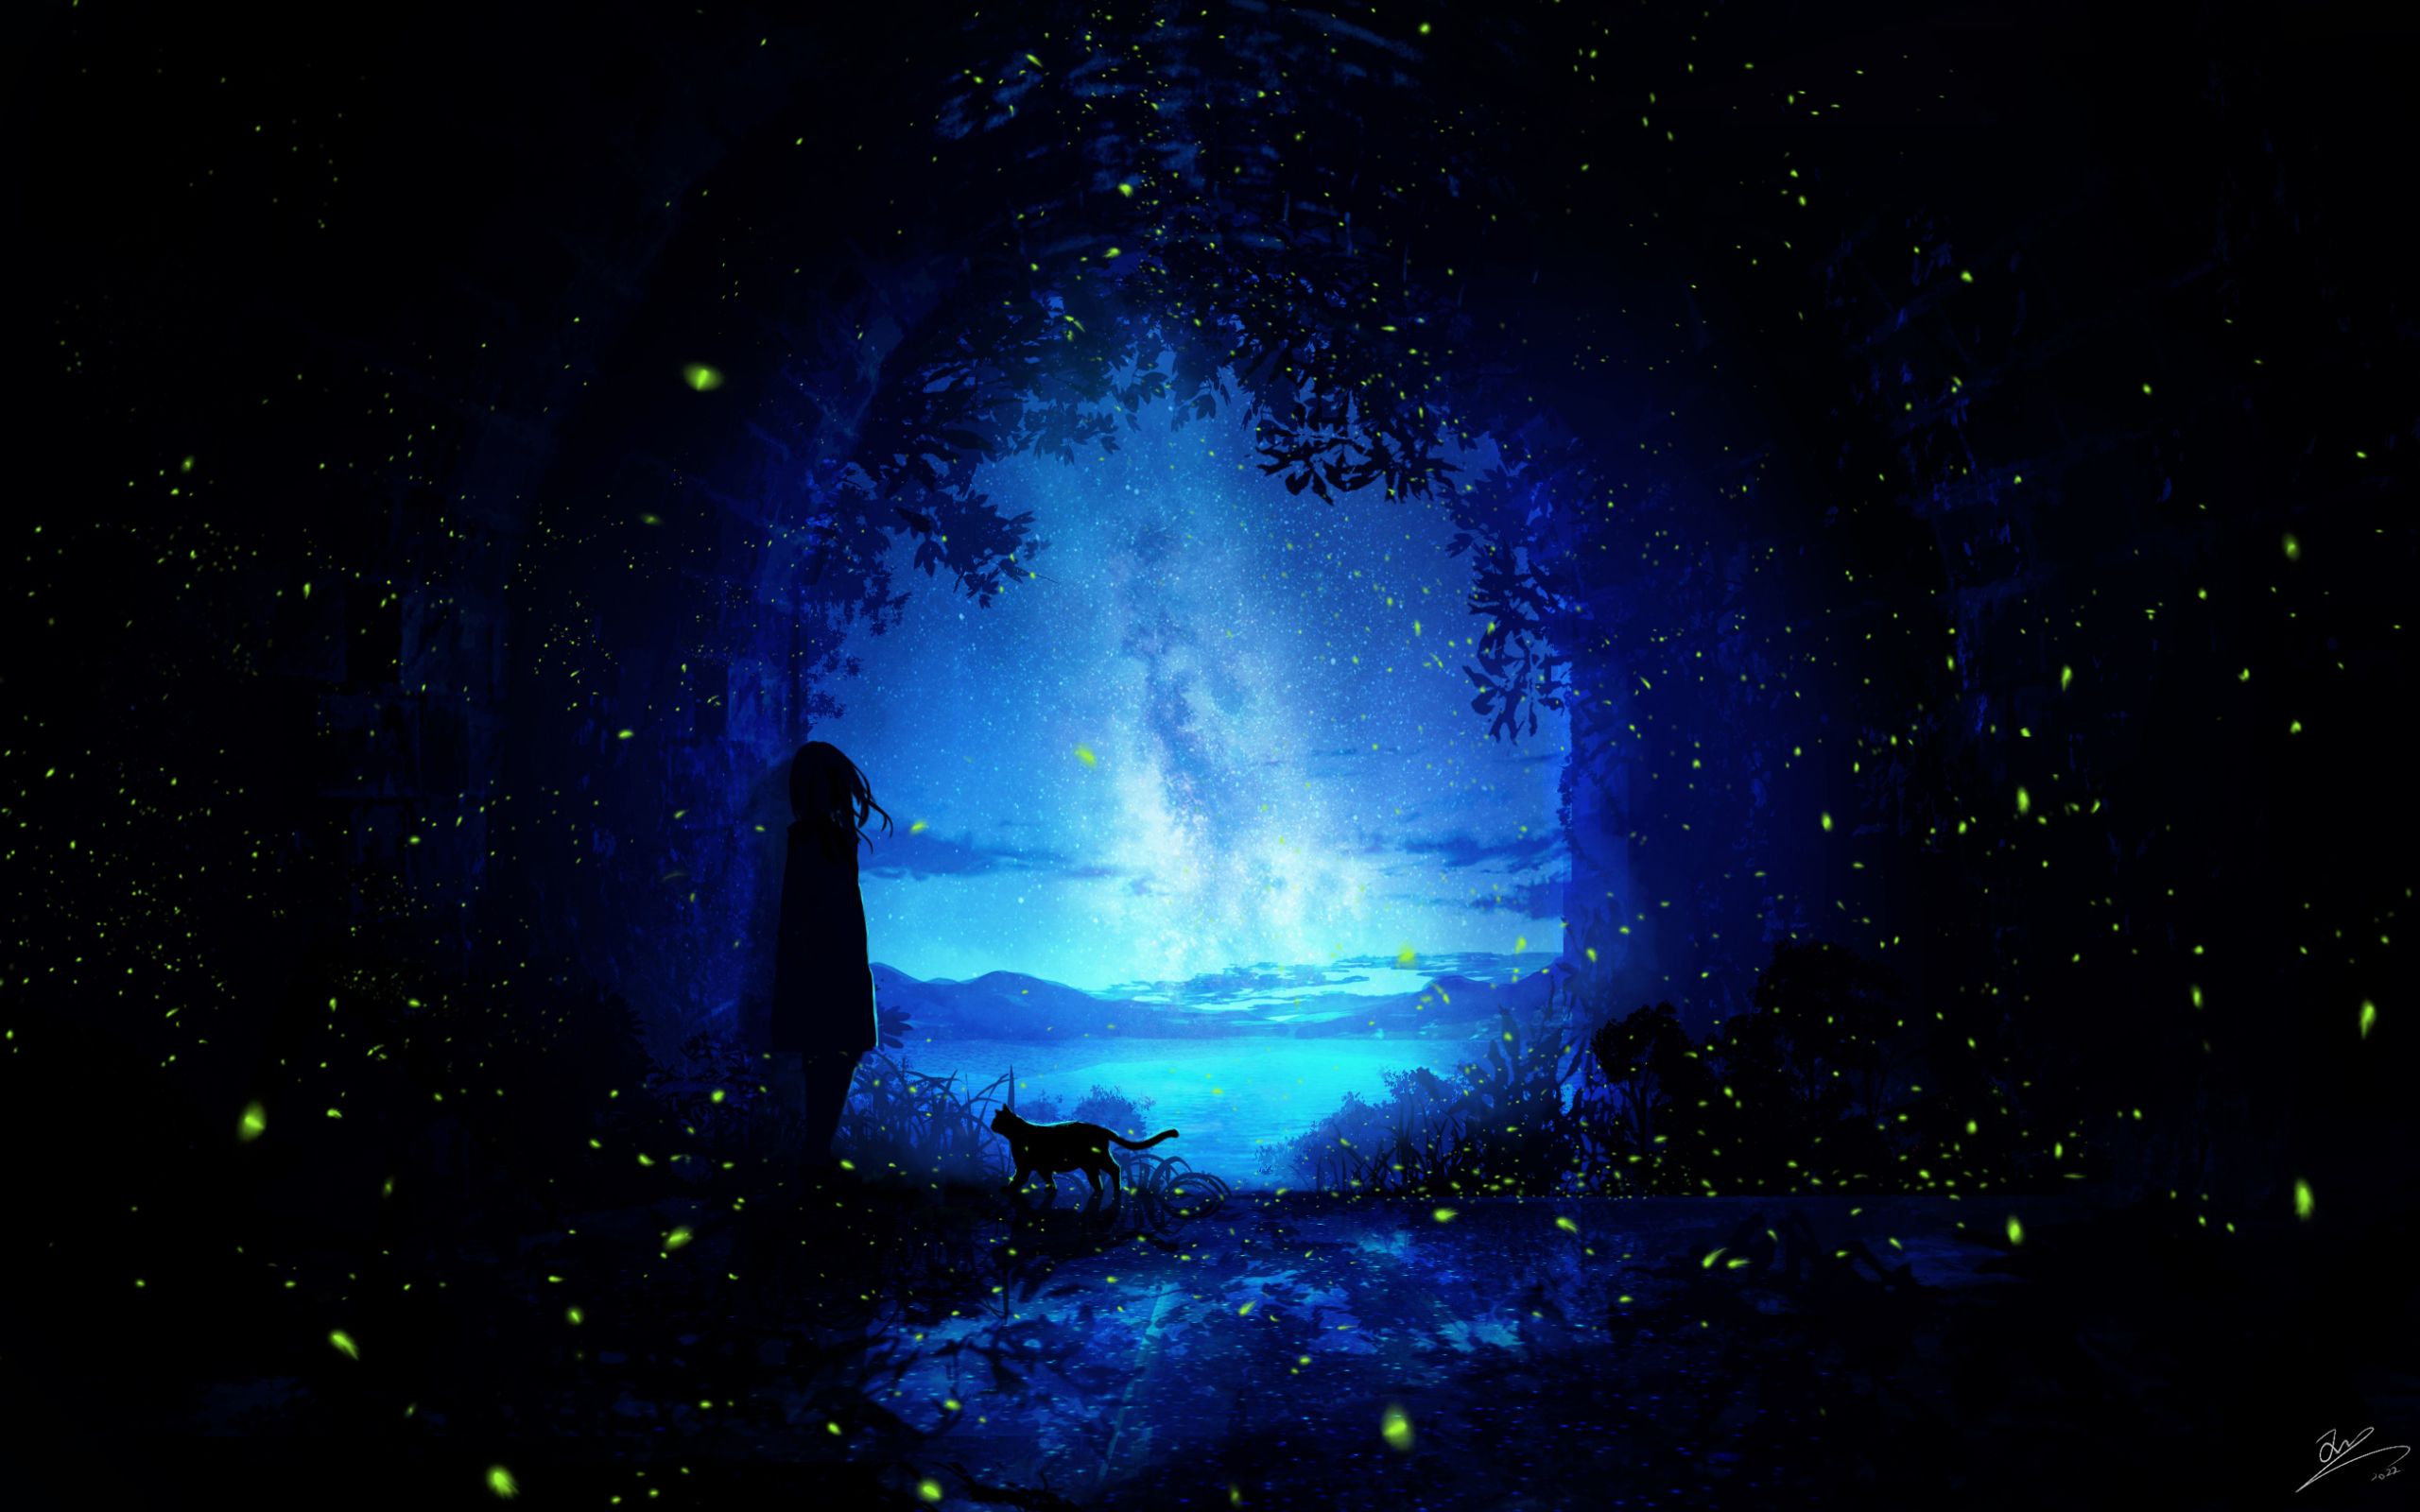 1920x1200 anime, night, girl, dog, river, stars, fireflies, forest, The Legend of Zelda: Breath of the Wild, The Legend of Zelda: Twilight Princess, The Legend of Zelda: Skyward Sword, The Legend of Zelda: Ocarina of Time, The Legend of Zelda: Majora's Mask - 2560x1600, night